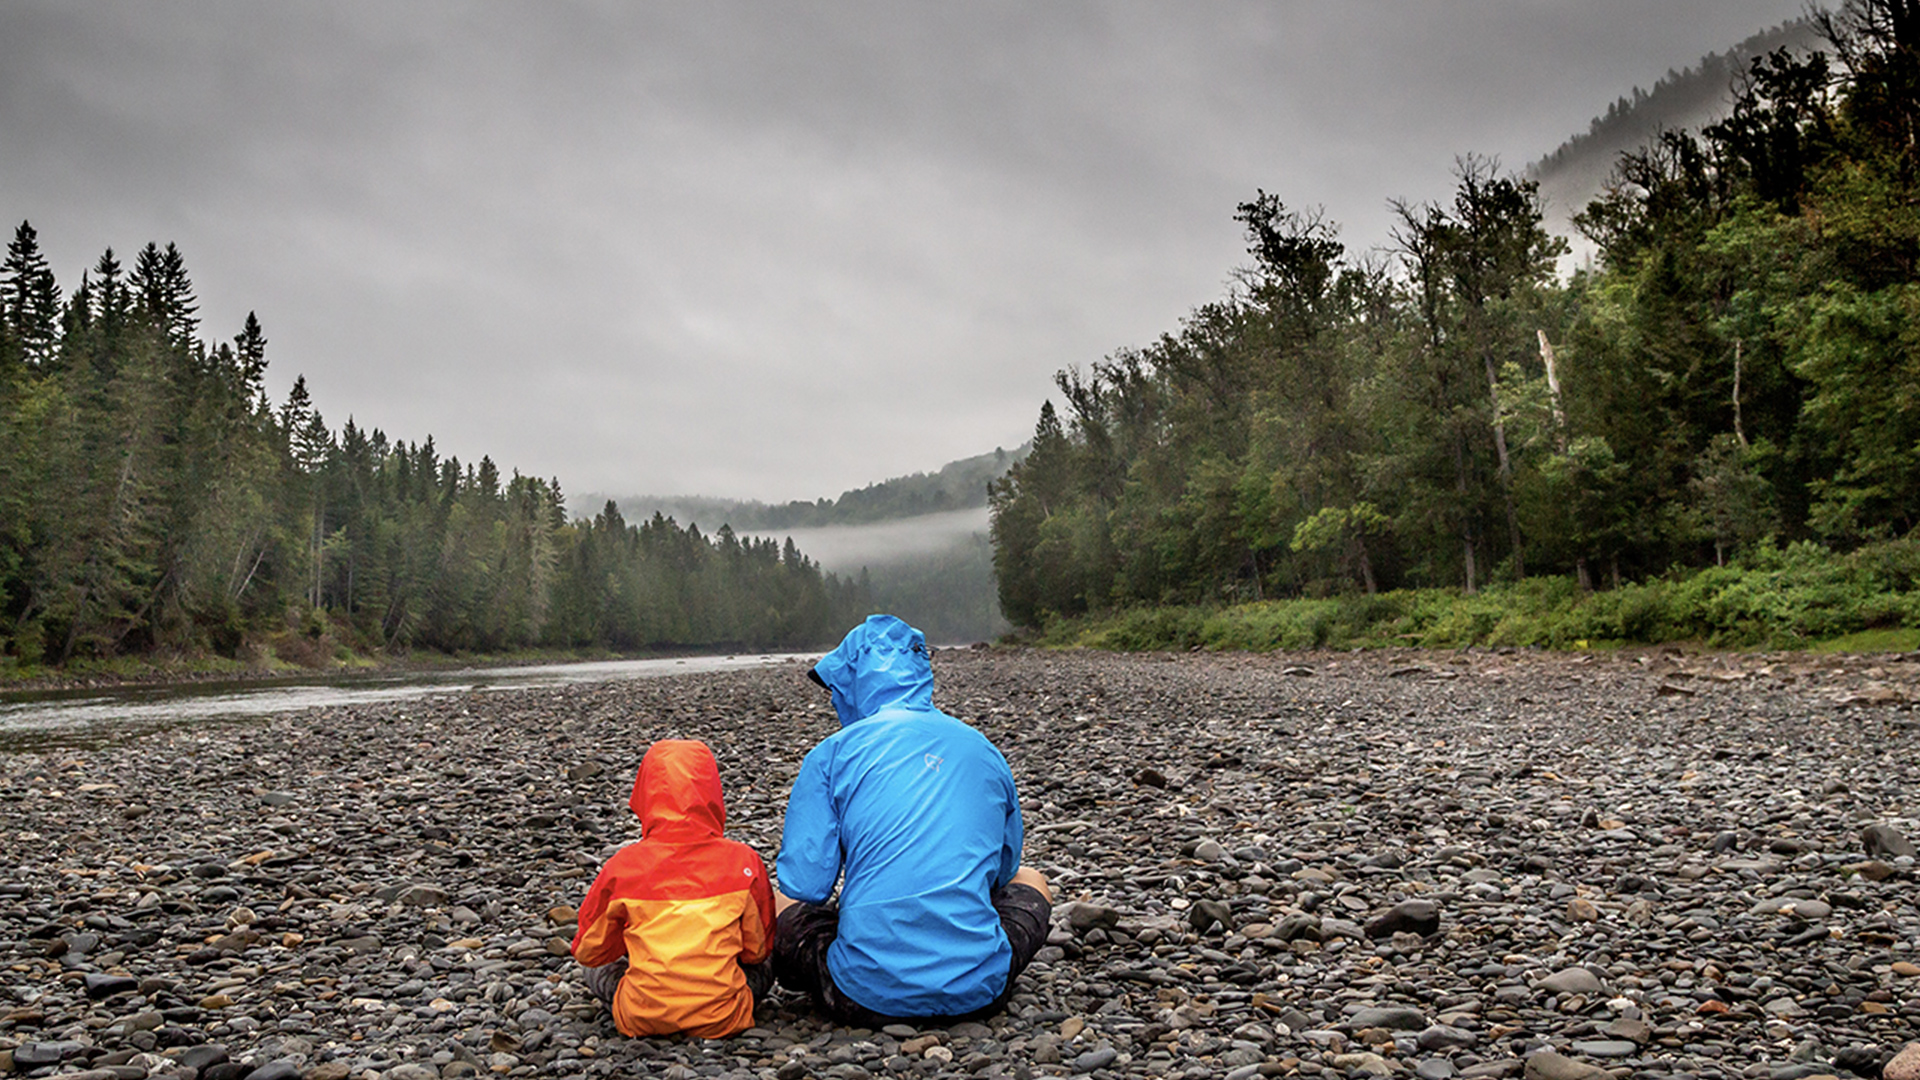 Man and boy in raincoats beside a river